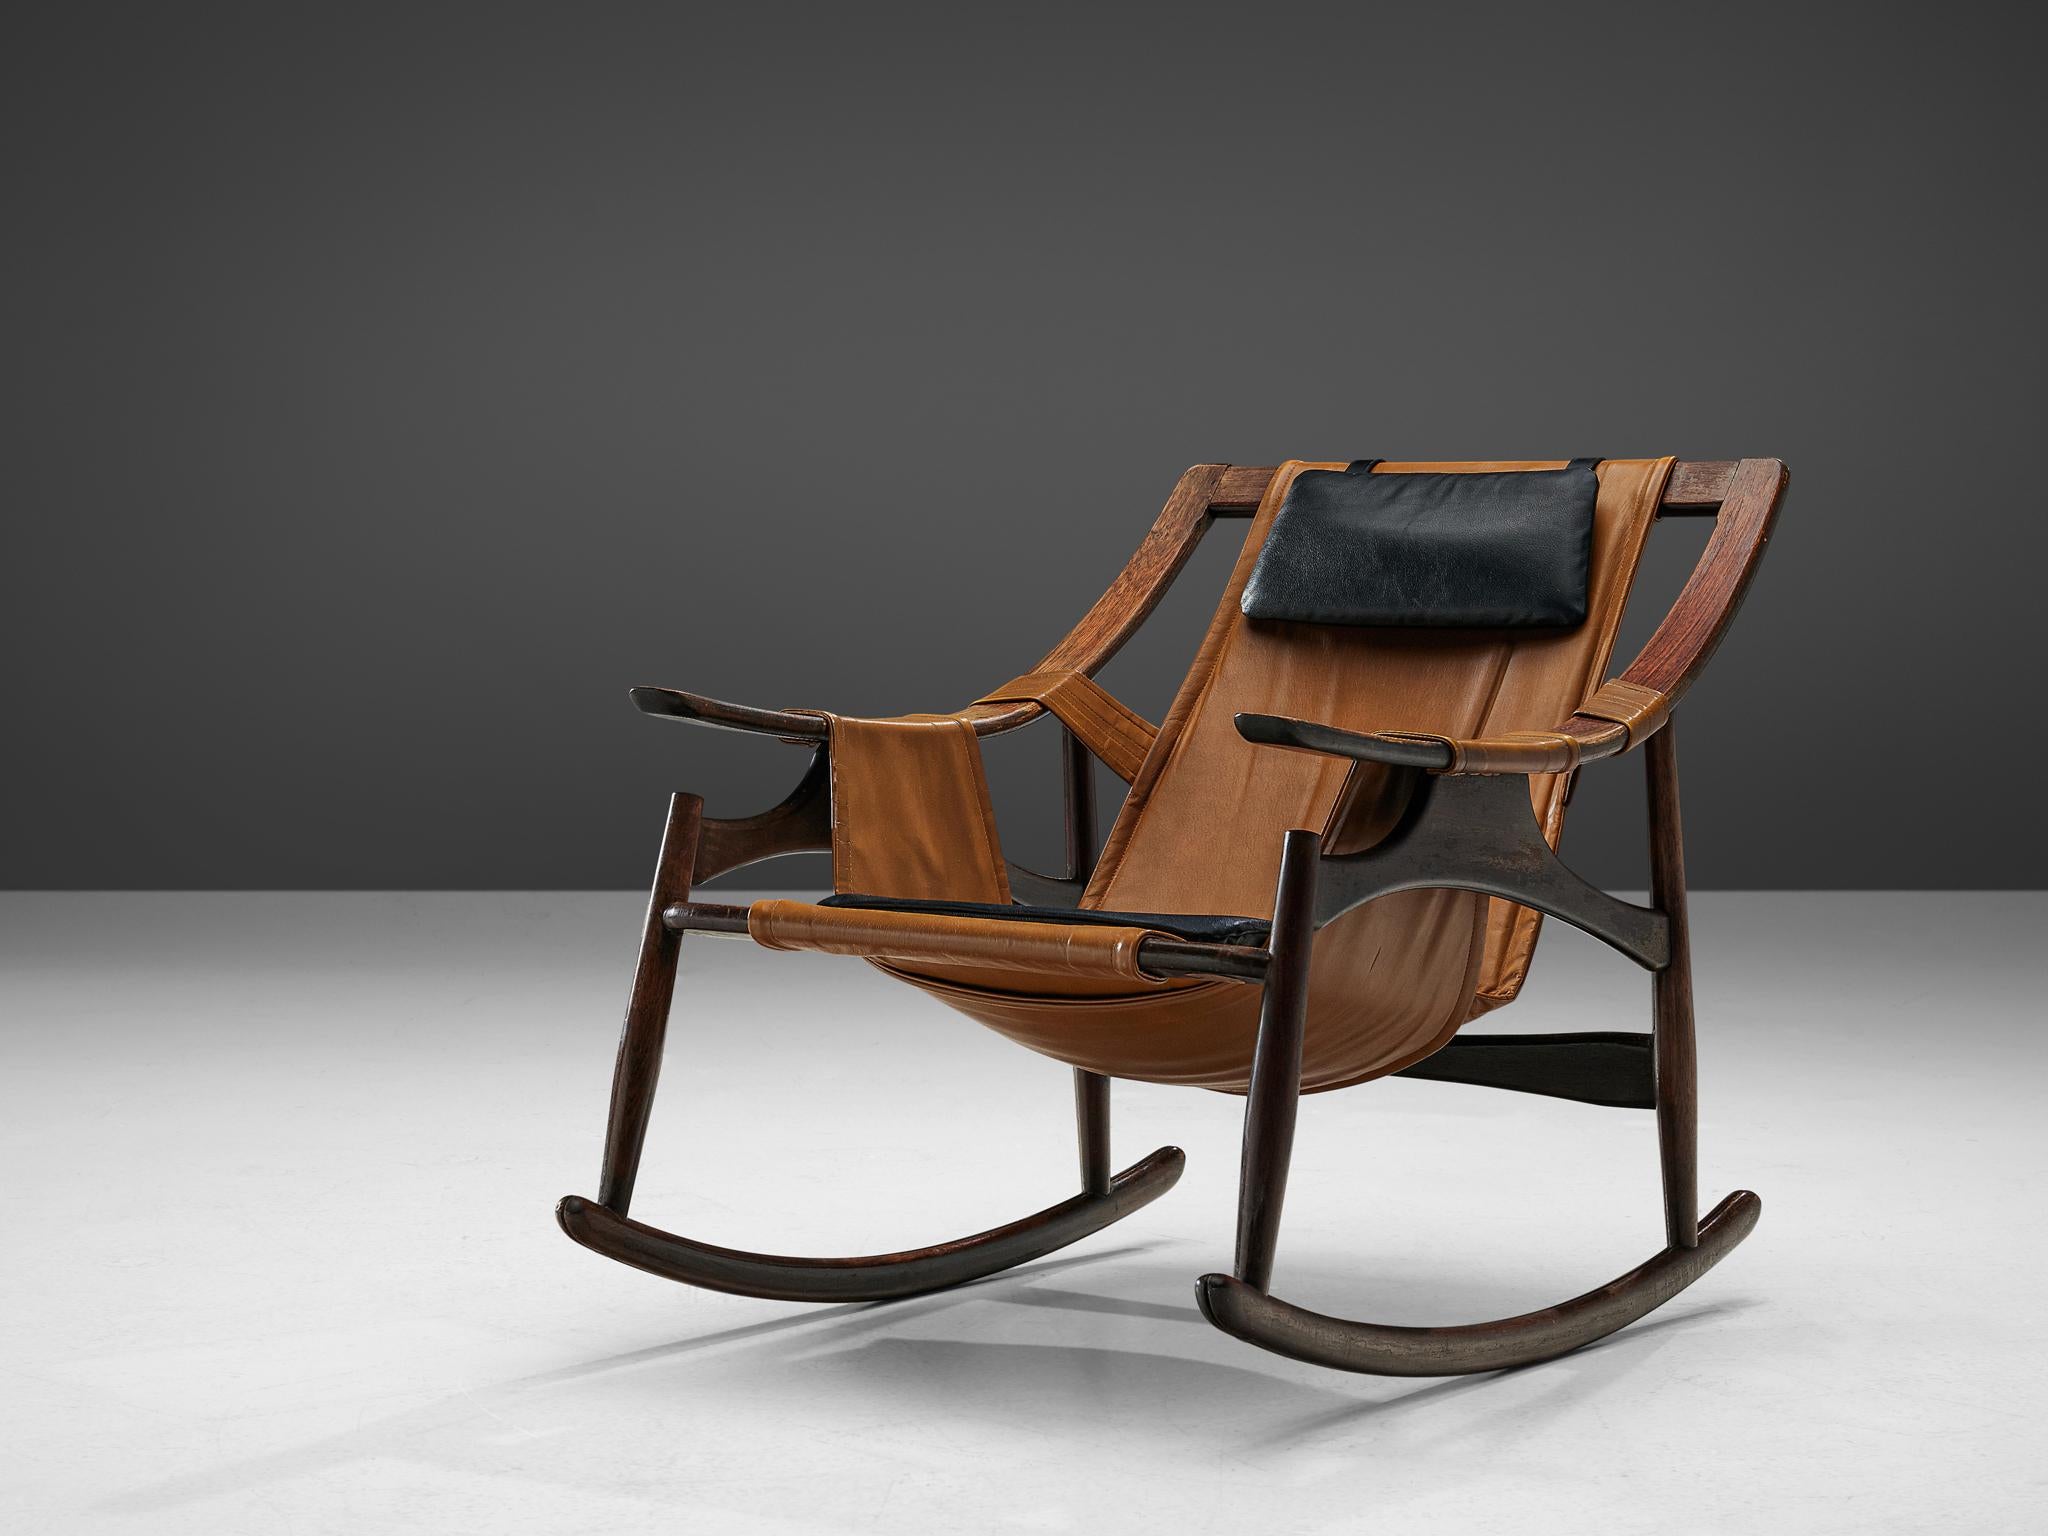 Liceu de Artes e Oficios, rocking chair, Brazilian walnut, leather, Brazil, 1960s. 

This lounge chair of Brazilian origin has an open structure based on round forms and curved lines. Both sides are joined by swinging arches which serve to hold the